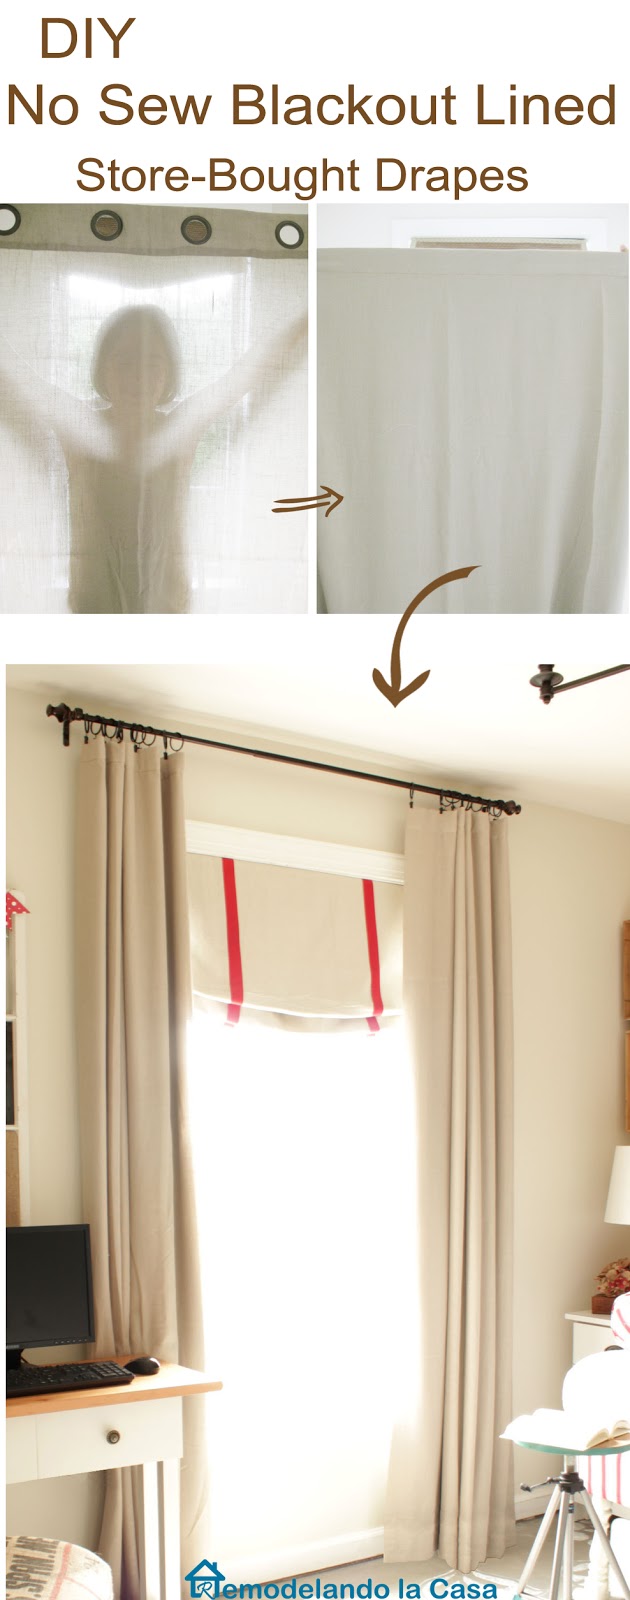 How to Make Removable No-Sew Blackout Window Inserts